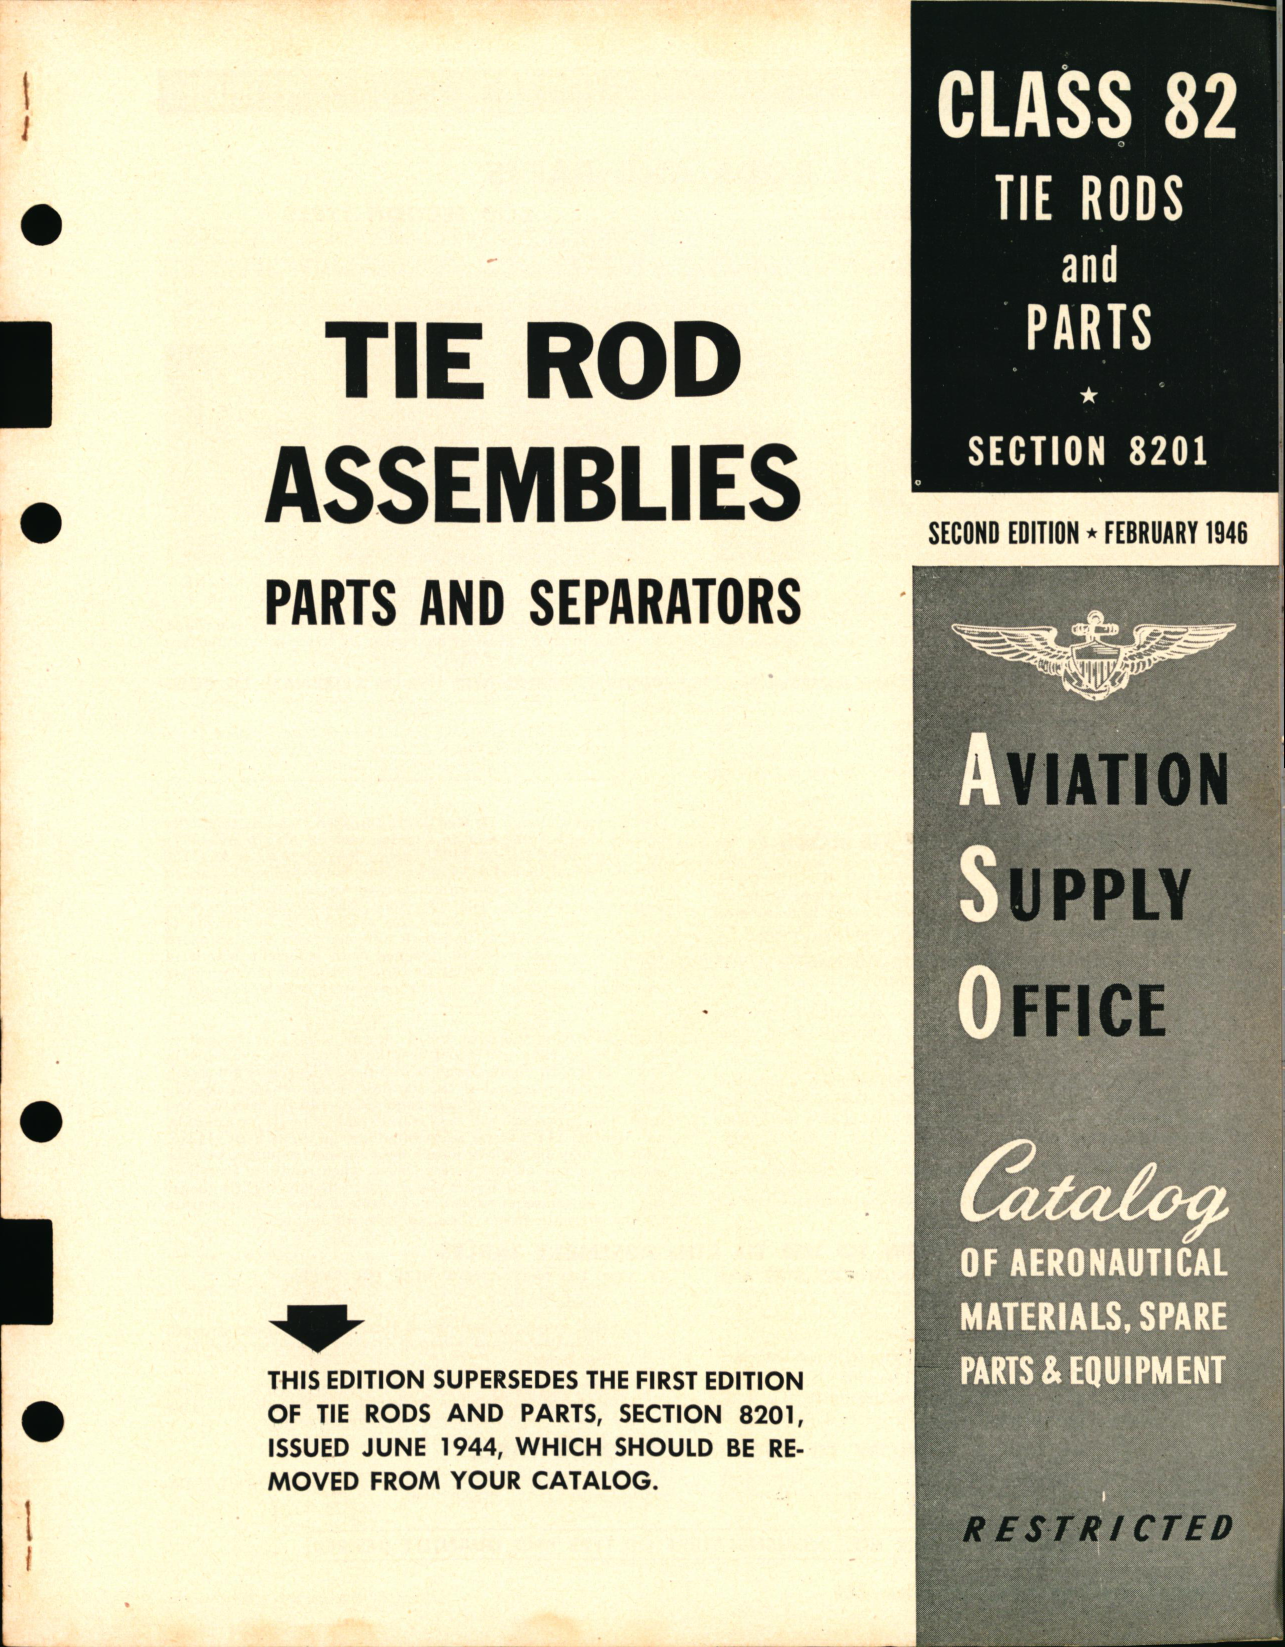 Sample page 1 from AirCorps Library document: Tie Rod Assemblies Parts and Separators